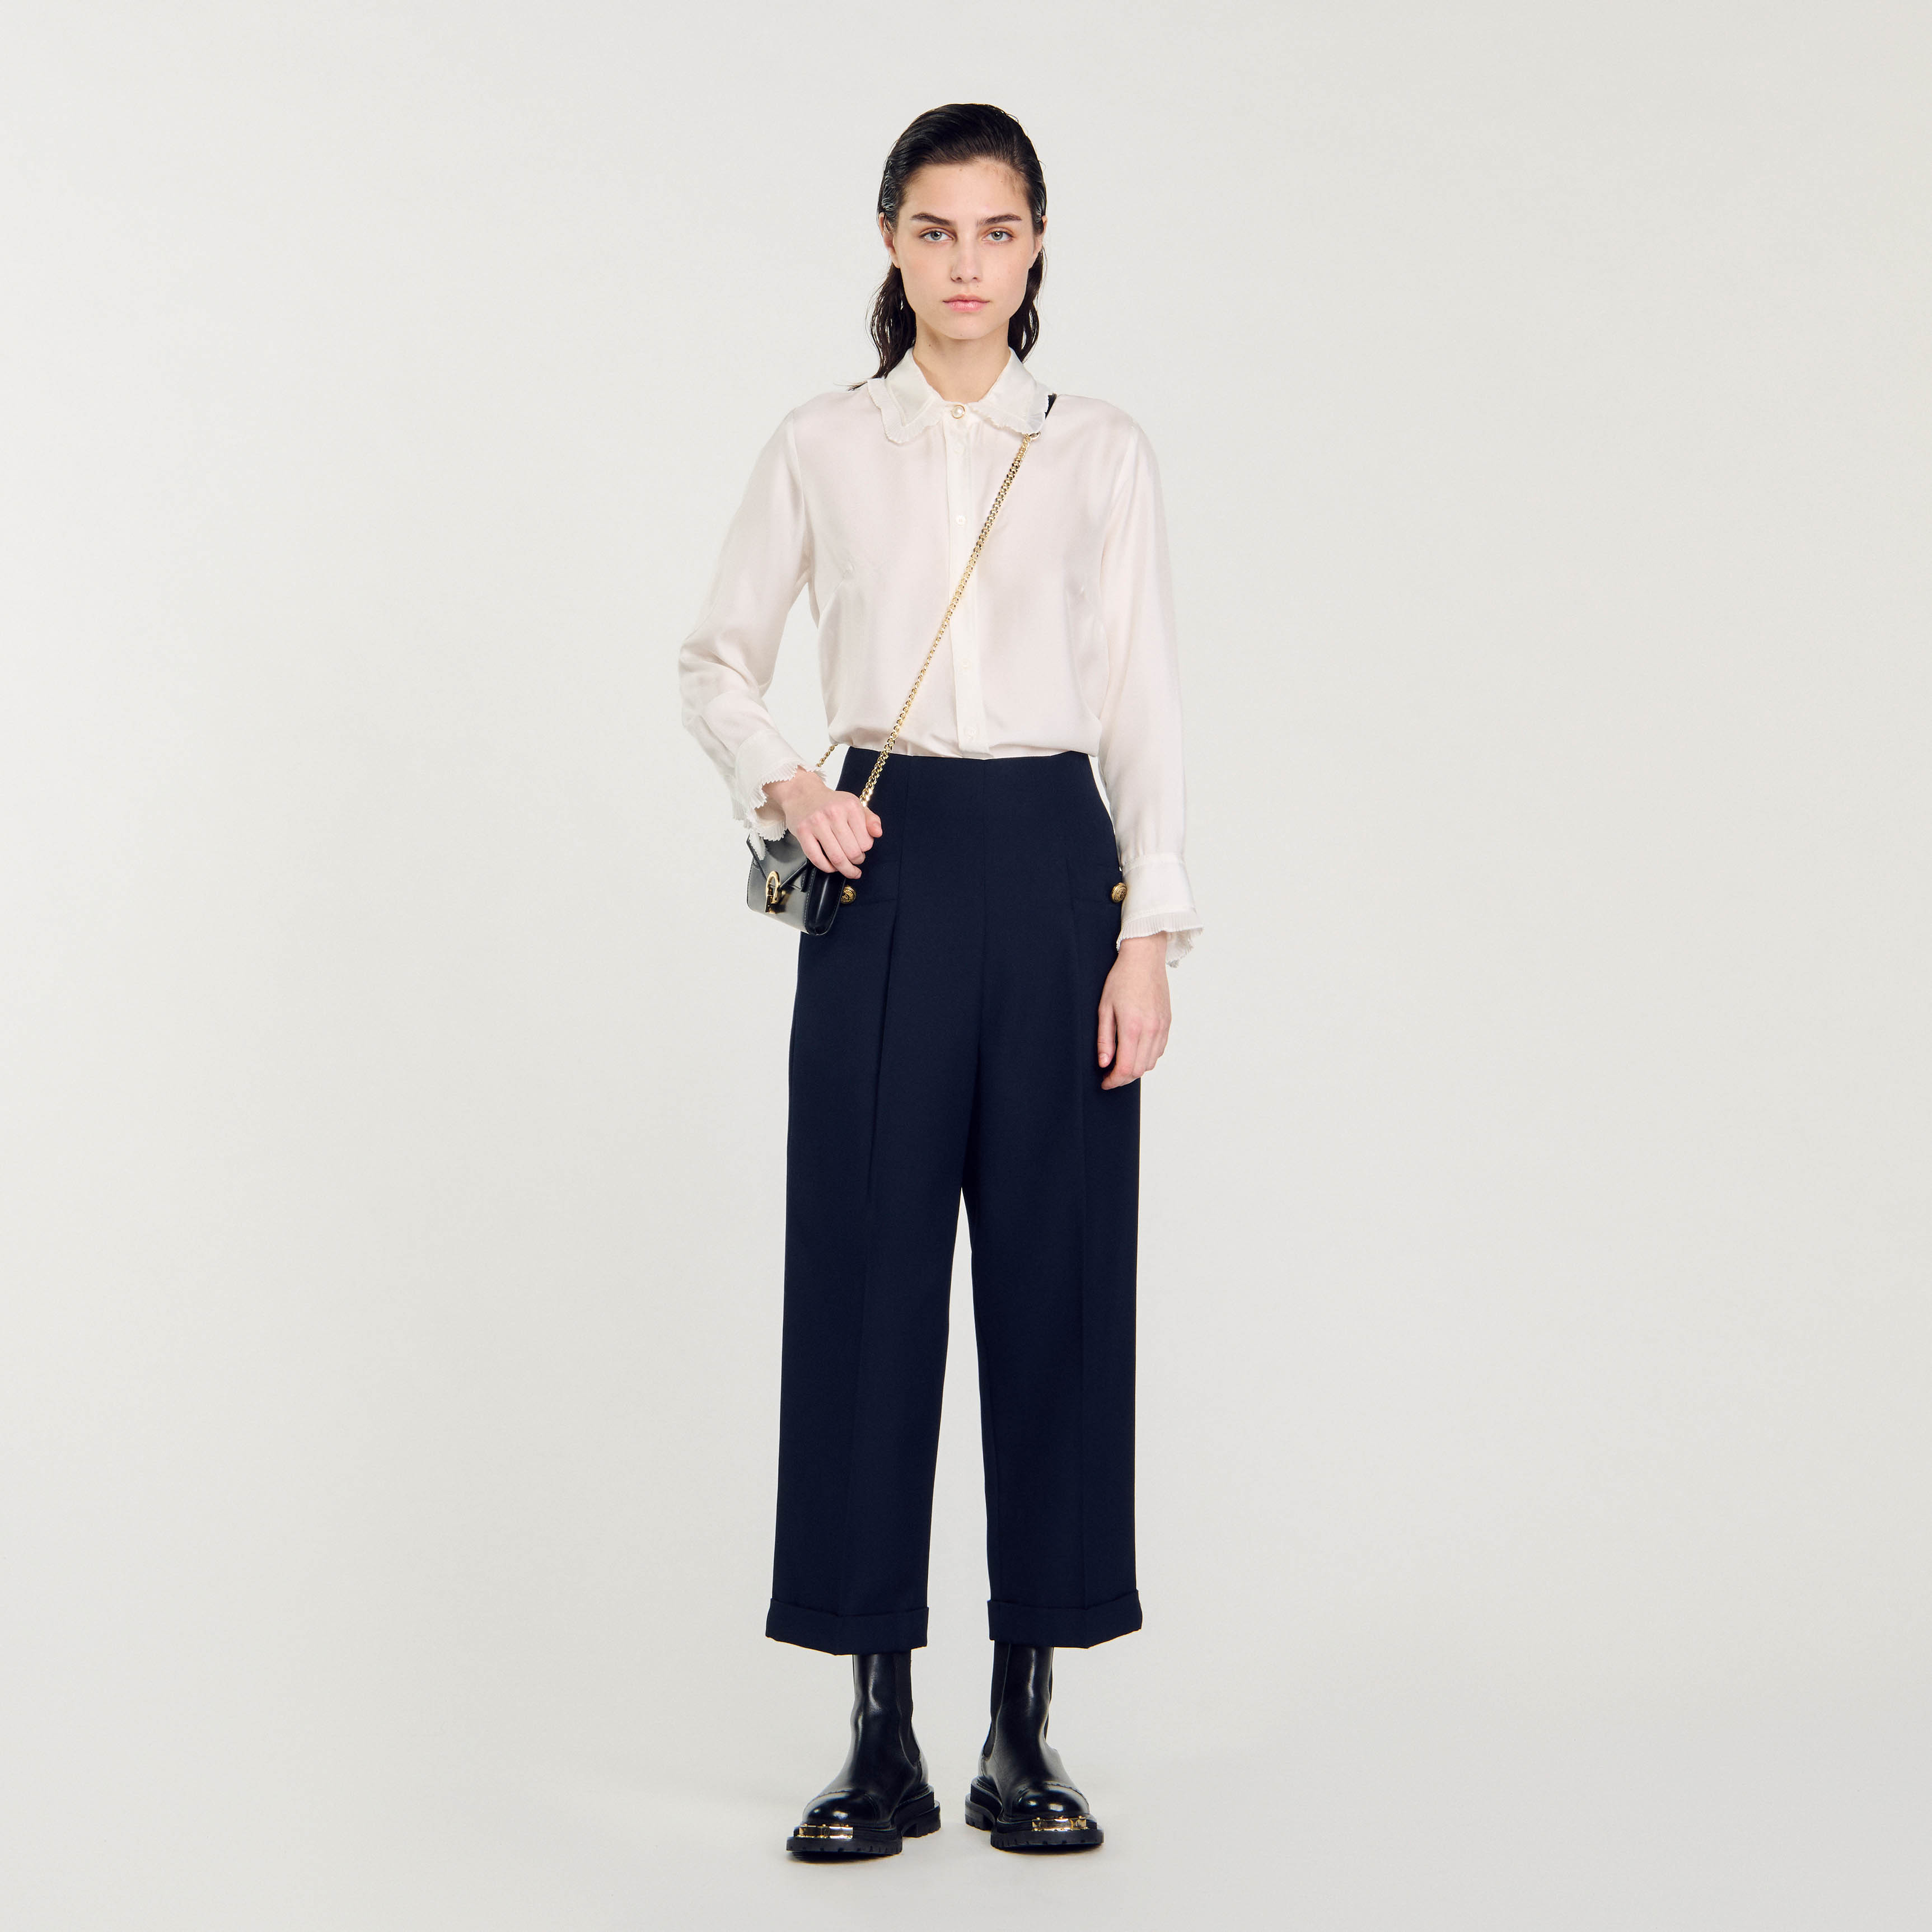 Sandro polyester Sandro women's pants â€¢ Buttoned pockets at the front and piped pockets at the back â€¢ Turn-up hems â€¢ Fastened with a concealed zip at the center back â€¢ These pants match the jacket This item's main material is at least 50% recycled